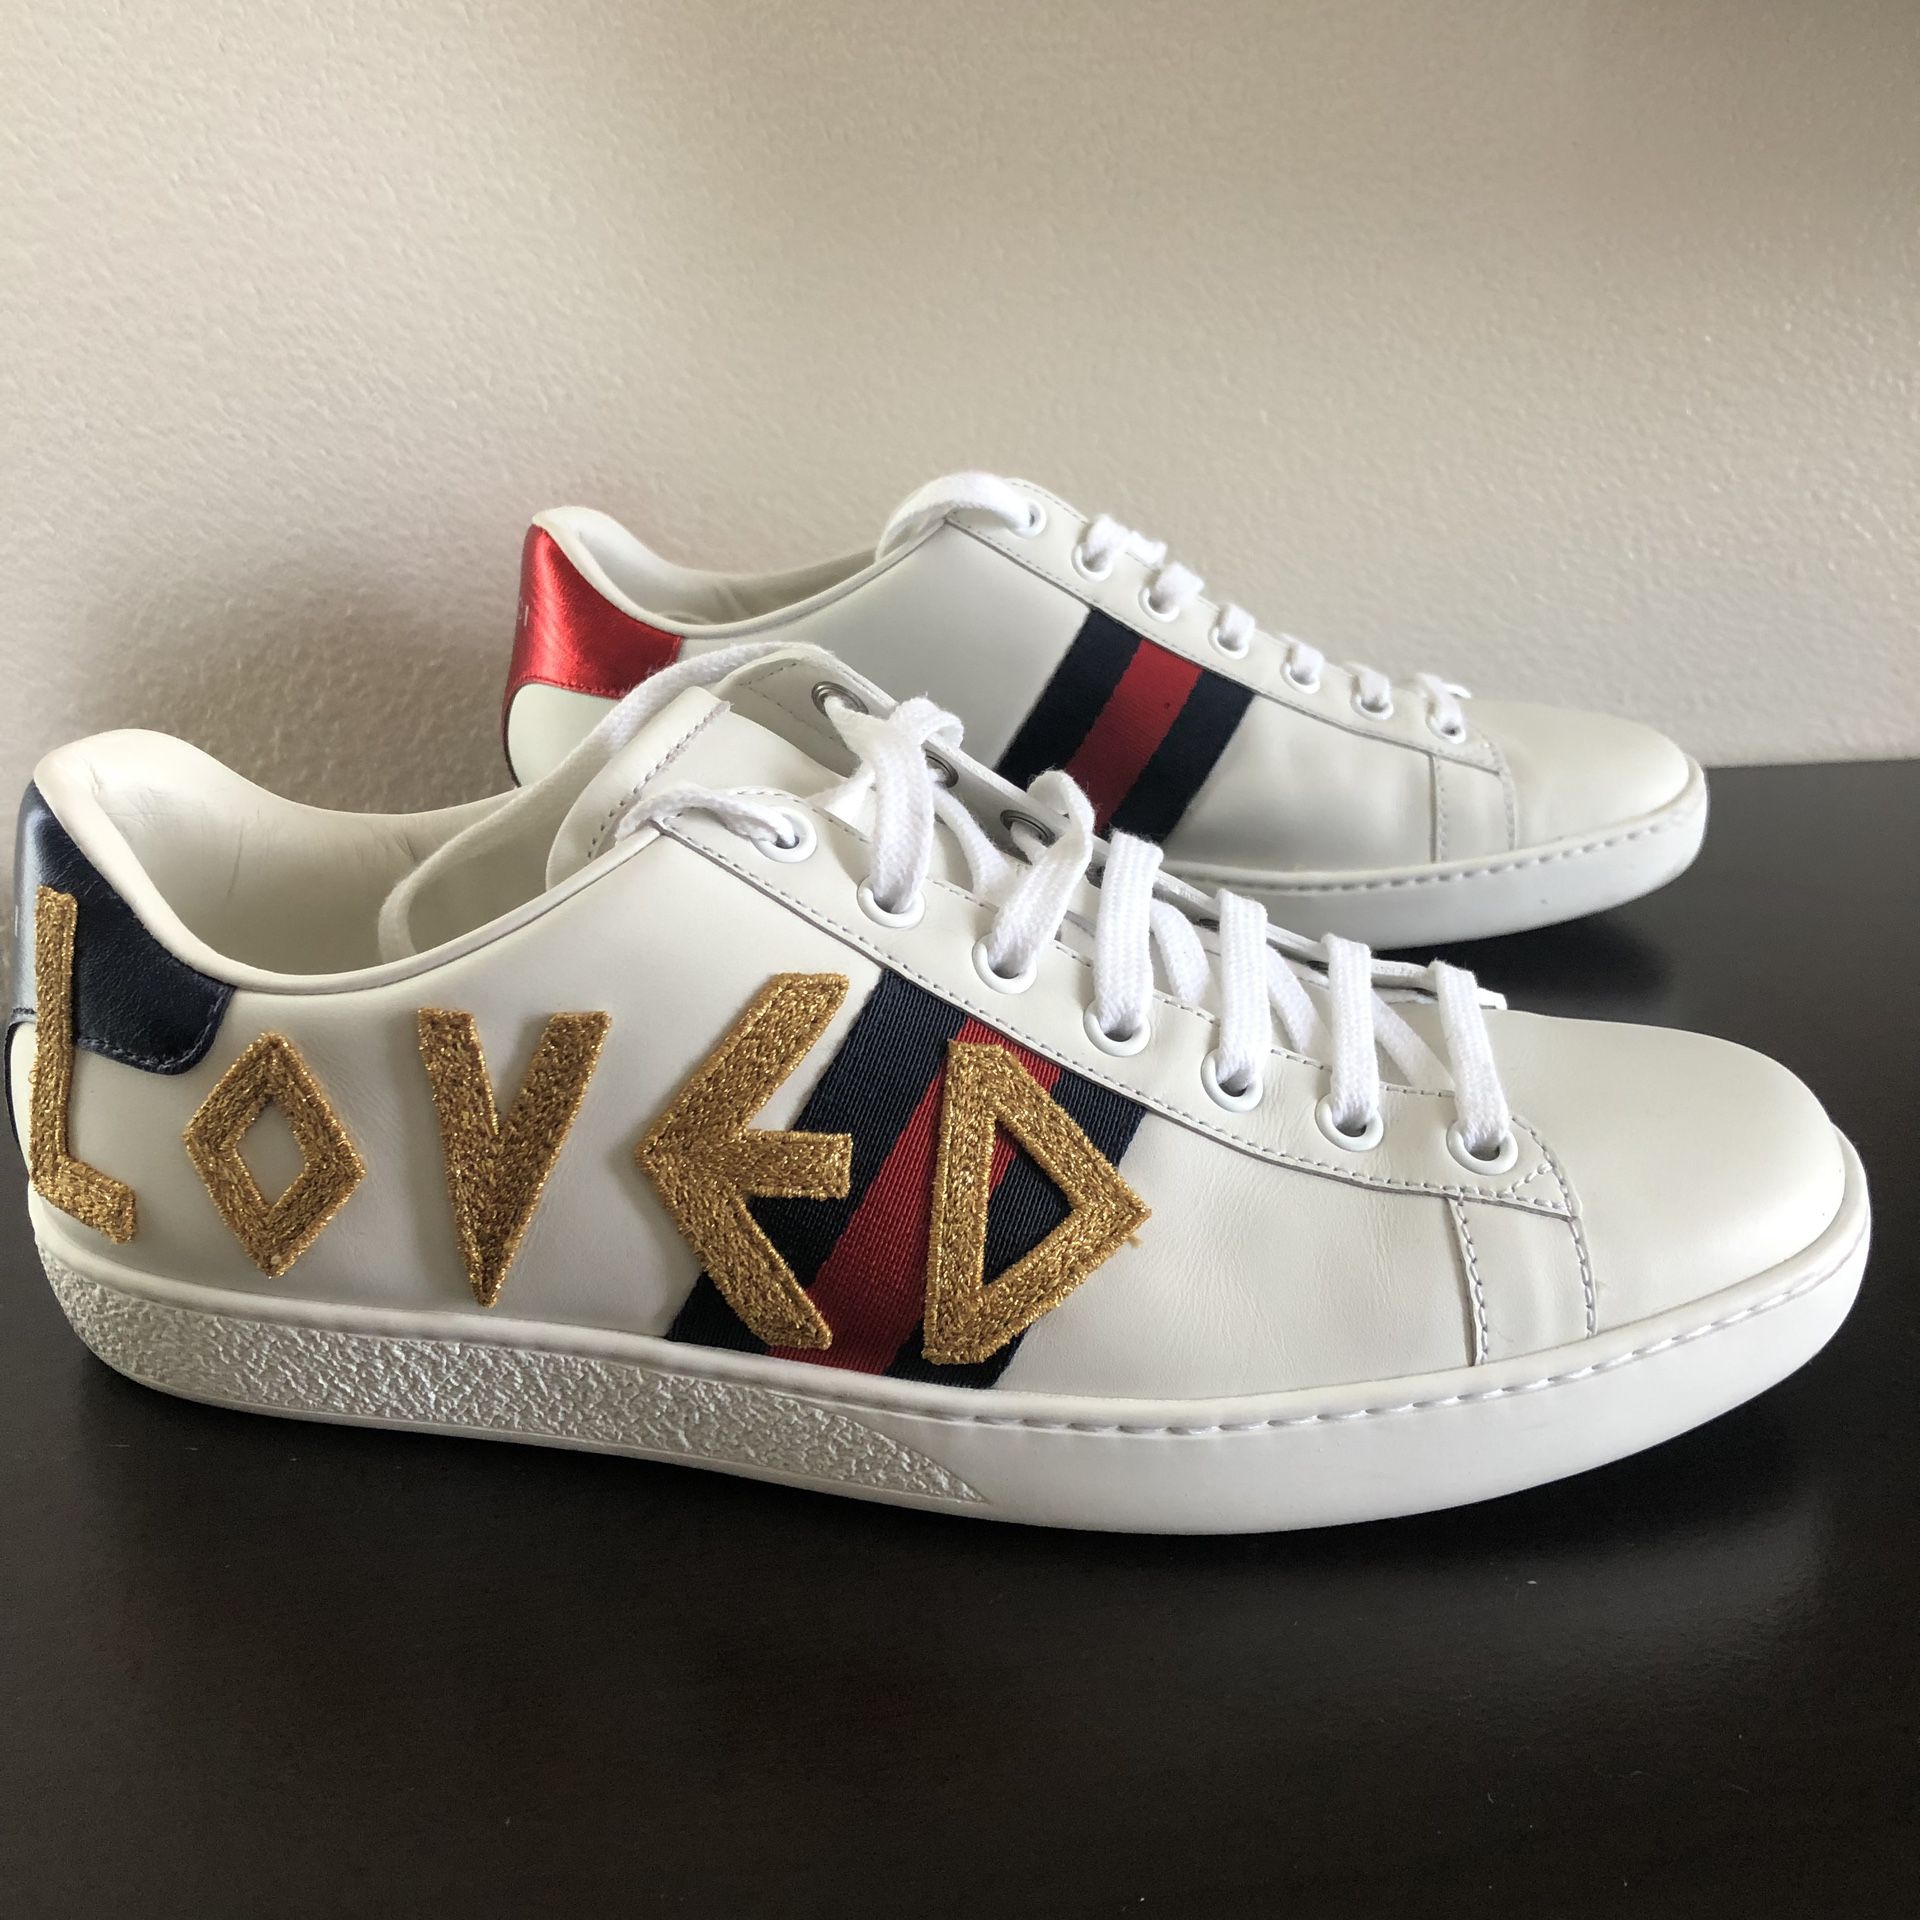 Gucci Ace Loved Shoes (Women) for Sale in Santa Monica, CA - OfferUp